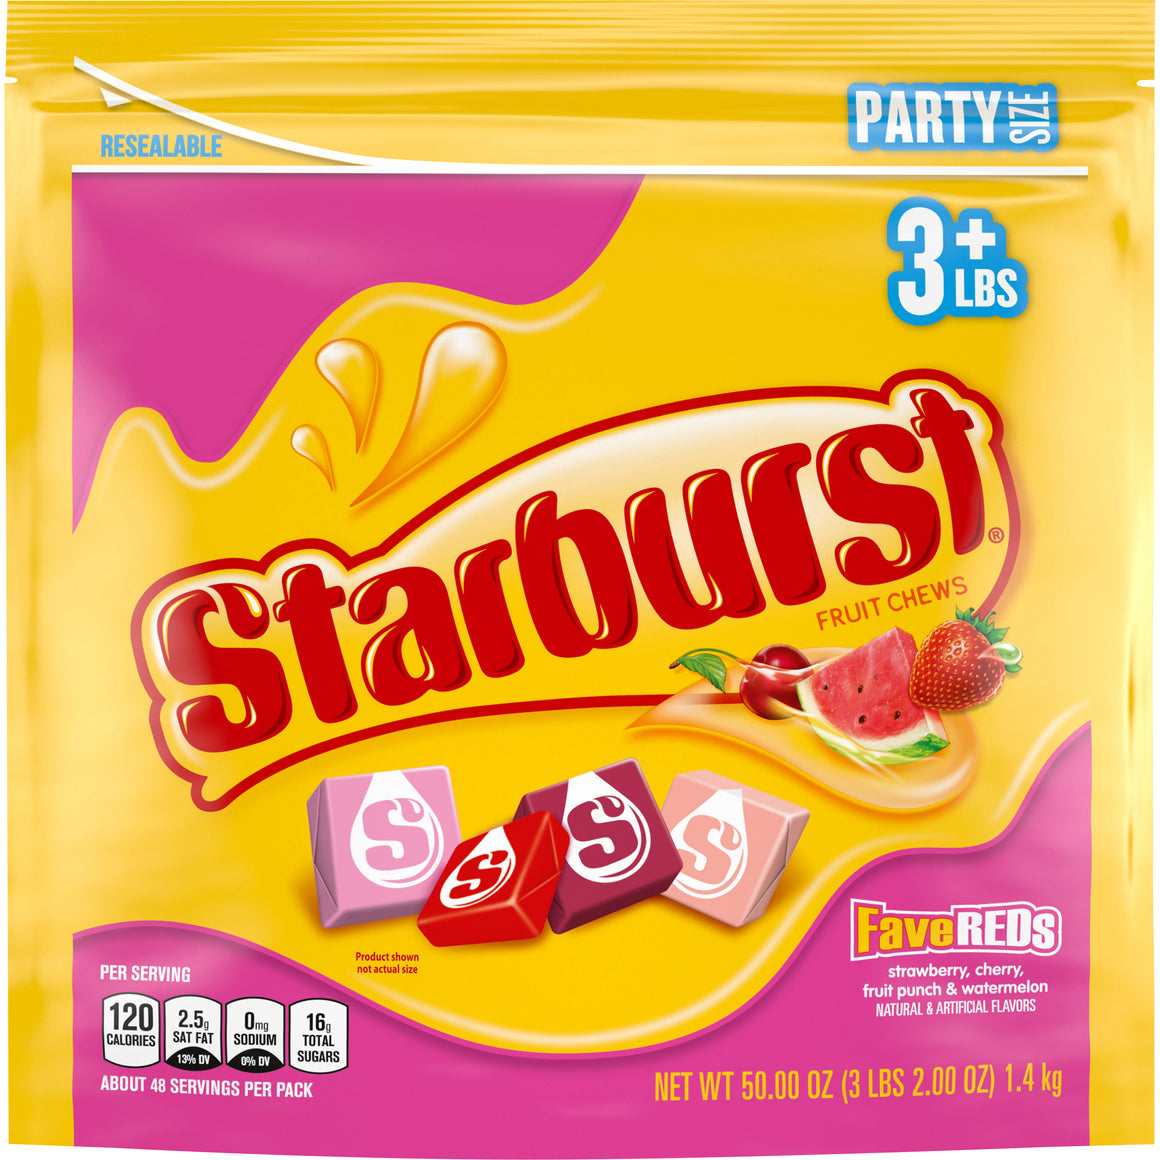 All City Candy Starburst Fruit Chews FaveREDS - 50-oz. Resealable Bag Wrigley For fresh candy and great service, visit www.allcitycandy.com